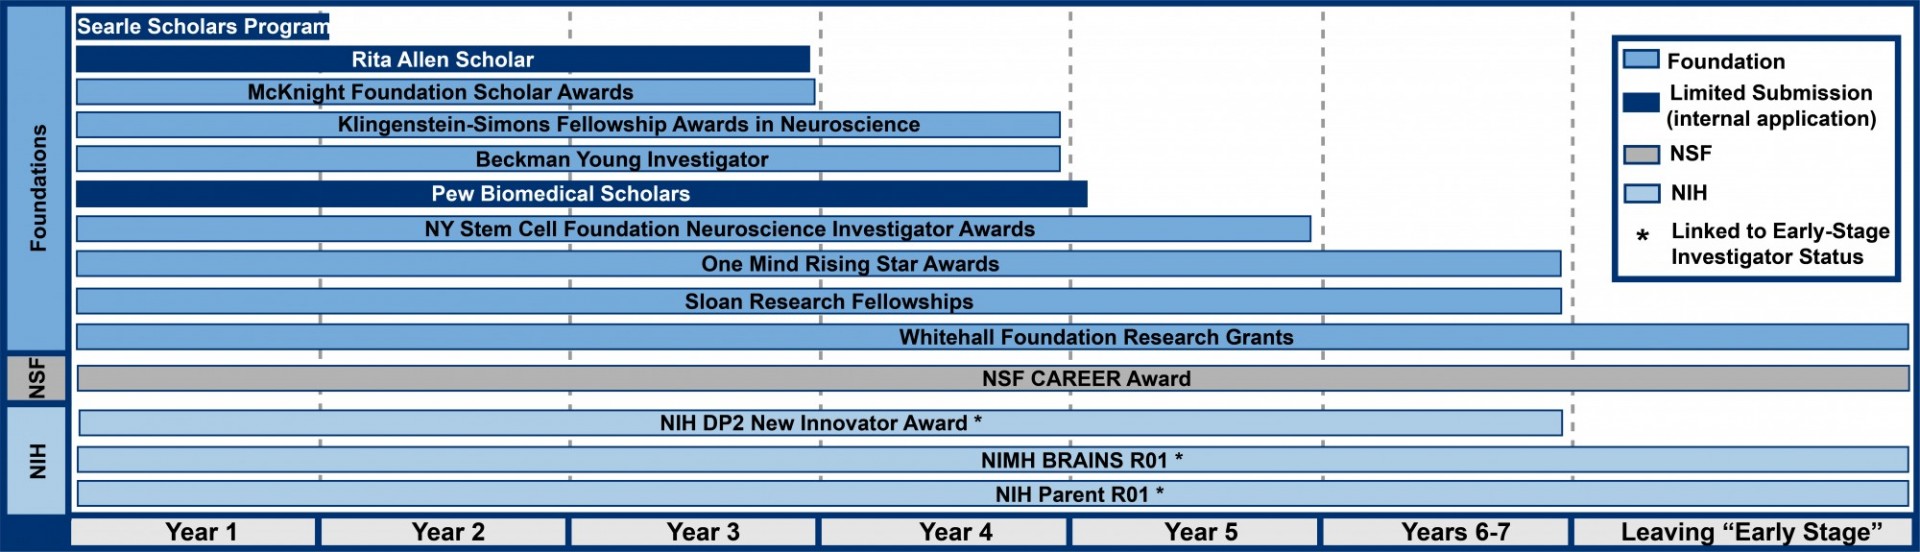 Early Career Faculty Funding Map showing funding opportunities from foundations and the NIH, starting from the first year of a faculty position to years 6-7, and to leaving "early stage investigator" status. All detailed information is reproduced in the tables below.